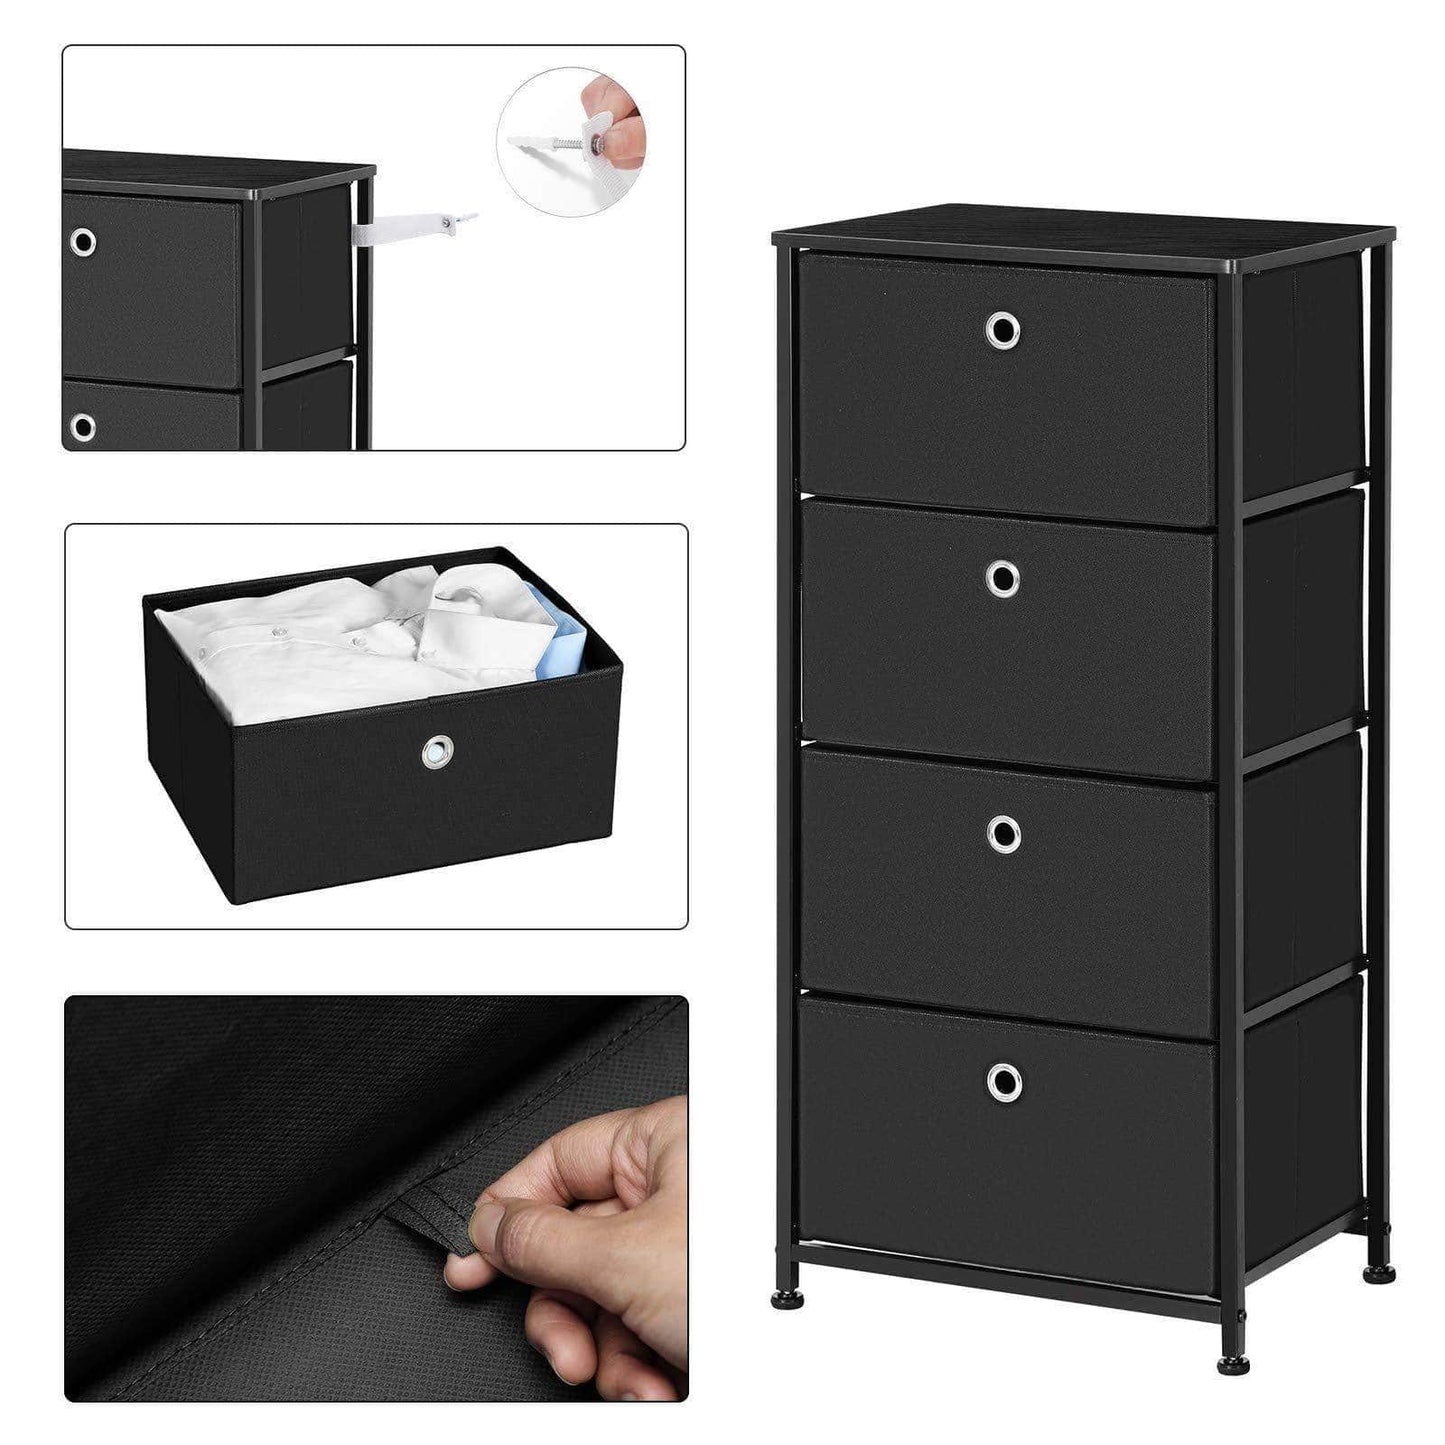 On amazon songmics 4 tier dresser drawer unit cabinet with 4 easy pull fabric drawers storage organizer with metal frame and wooden tabletop for living room closet hallway black ults04h